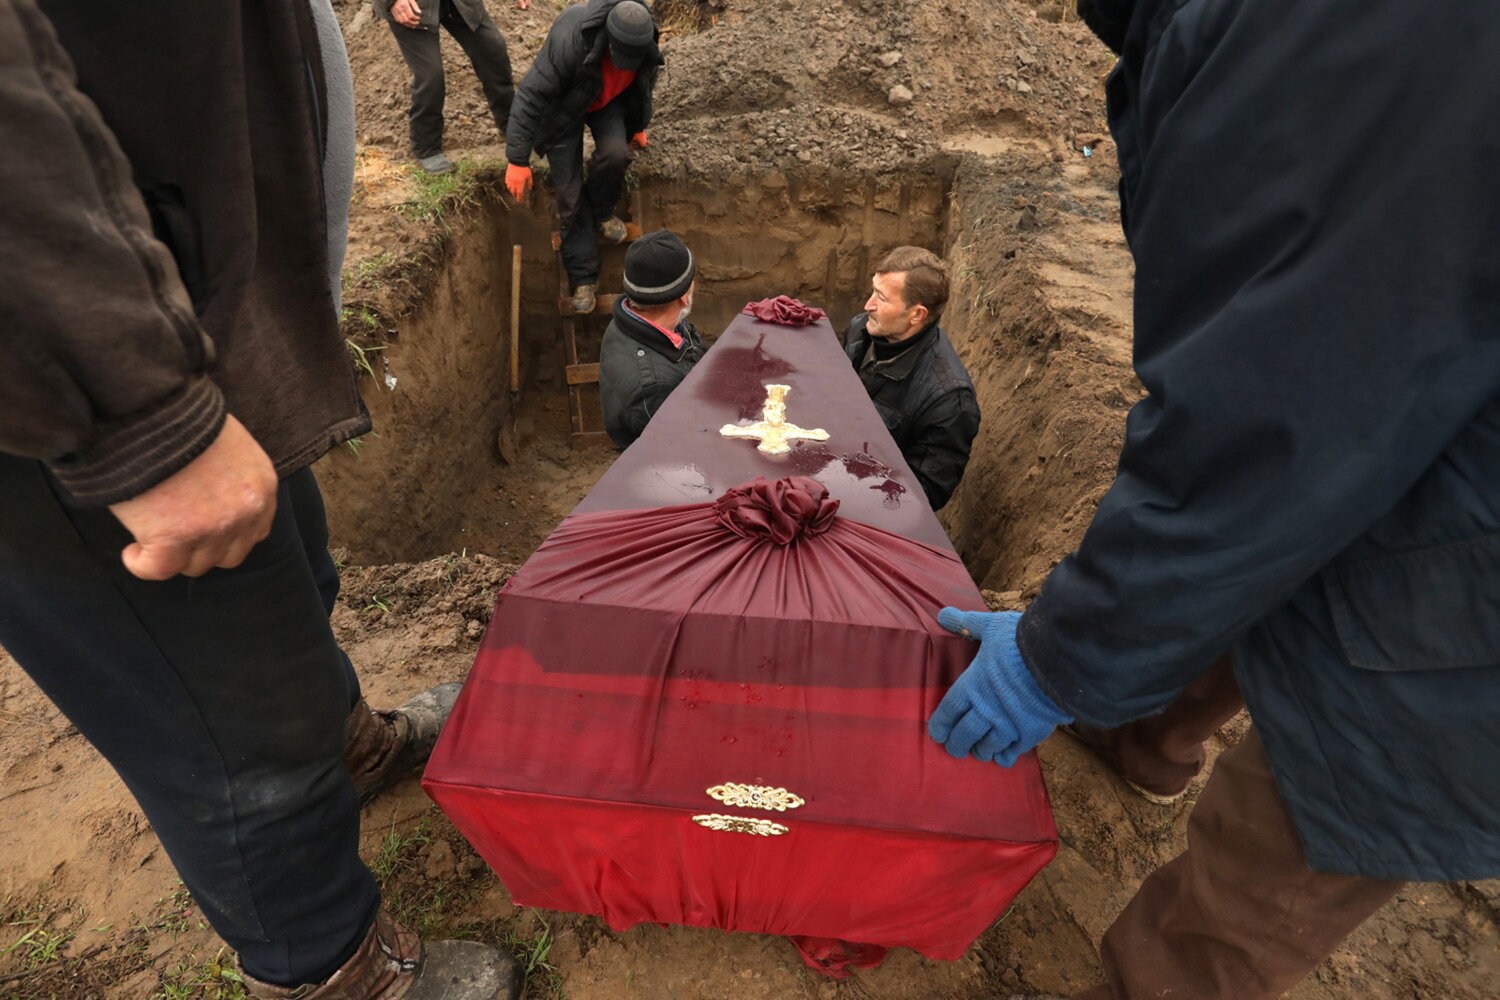 Three members of the Ostrovskii family including Viktorya, age 51, Anatoli, age 75, and Vyacheslav, age 32, were buried together in a single grave at the Bucha cemetery on April 22, 2022. The three were shot and killed by Russians on March 7, as they tried to flee Bucha, Ukraine in their car according to a family friend who was there to oversee their burial. Over 700 bodies have been brought to morgues in the area, which are being investigated for war crimes. (Carolyn Cole/Los Angeles Times/TNS)